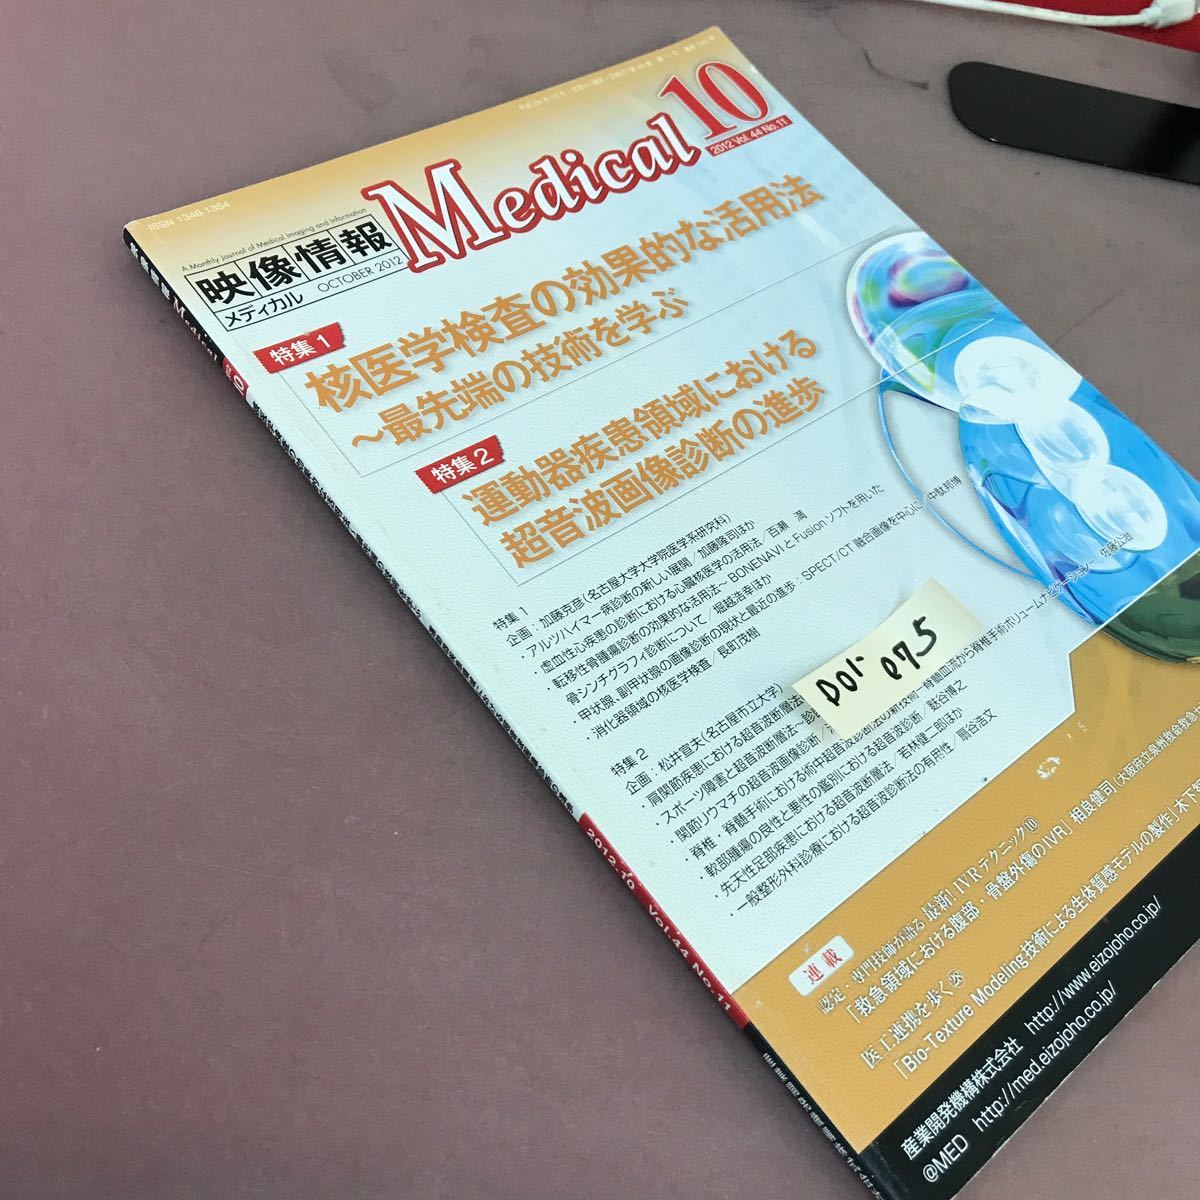 D01-075 映像情報Medical 2012.10 Vol.44 No.11 核医学検査の効果的な活用法〜最先端の技術を学ぶ 他 産業開発機構株式会社_画像2